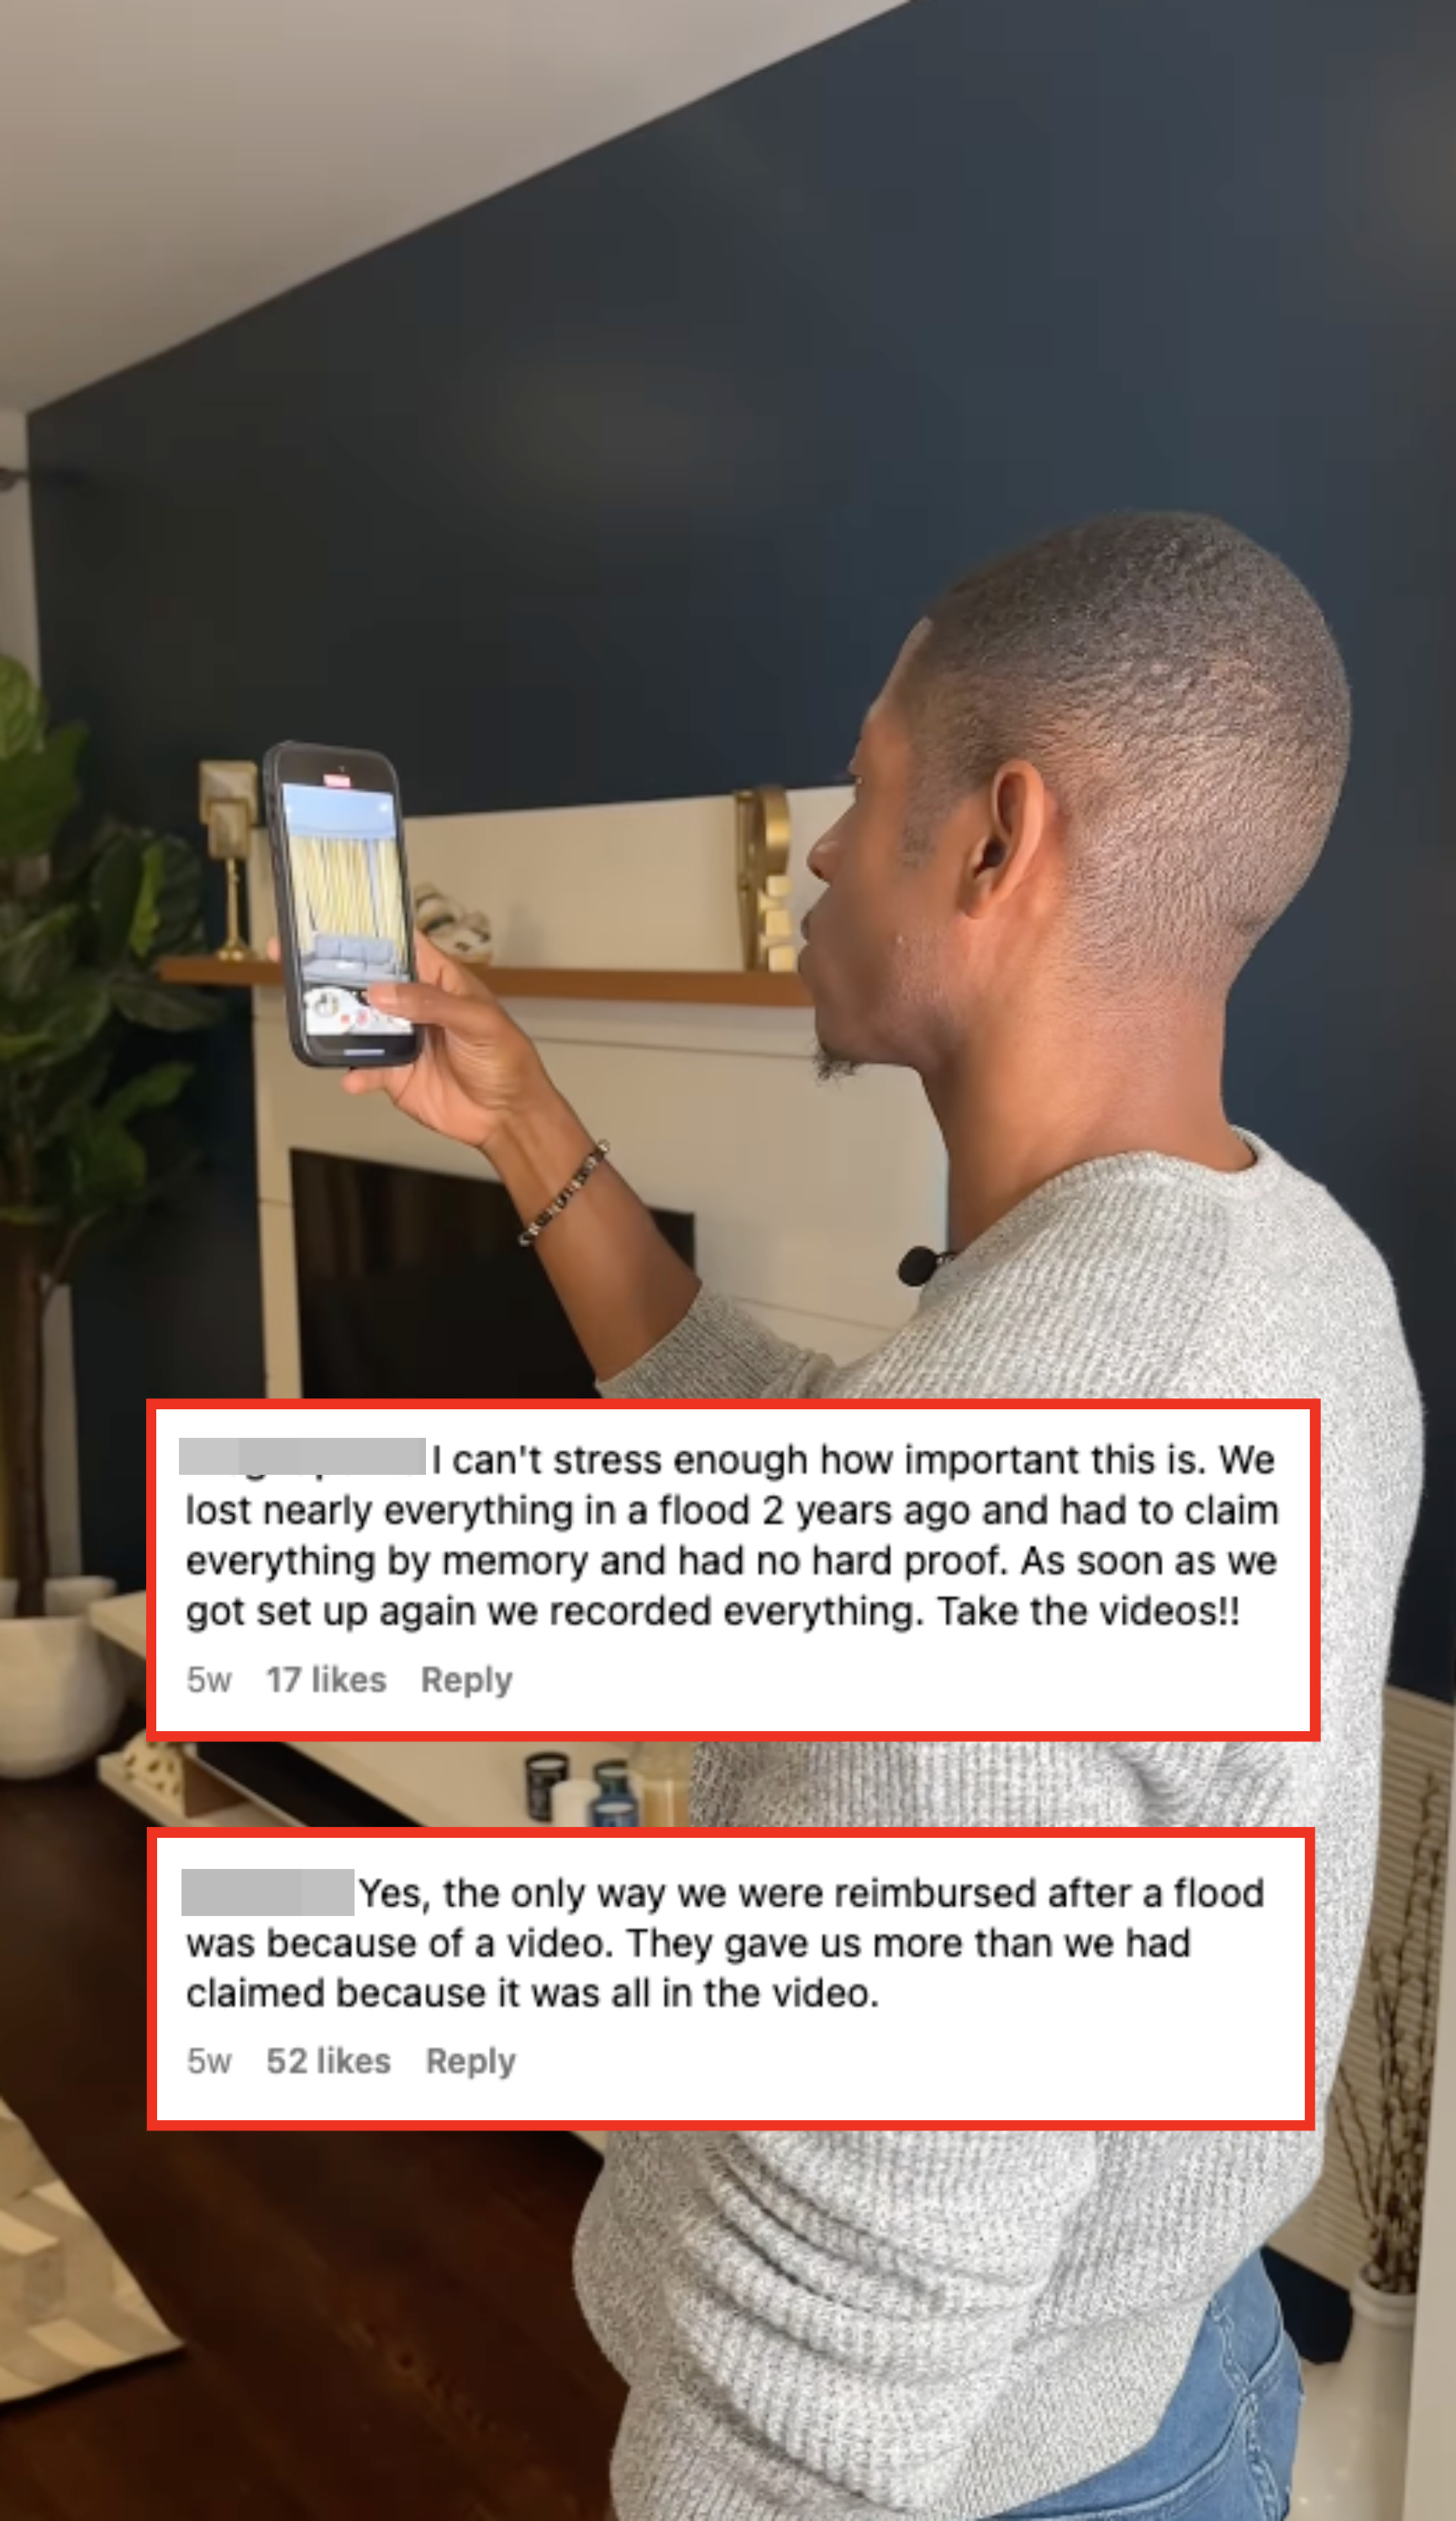 Kyshawn holding a smartphone with video recording, standing indoors near a TV, with comments about the importance of a video walk-through